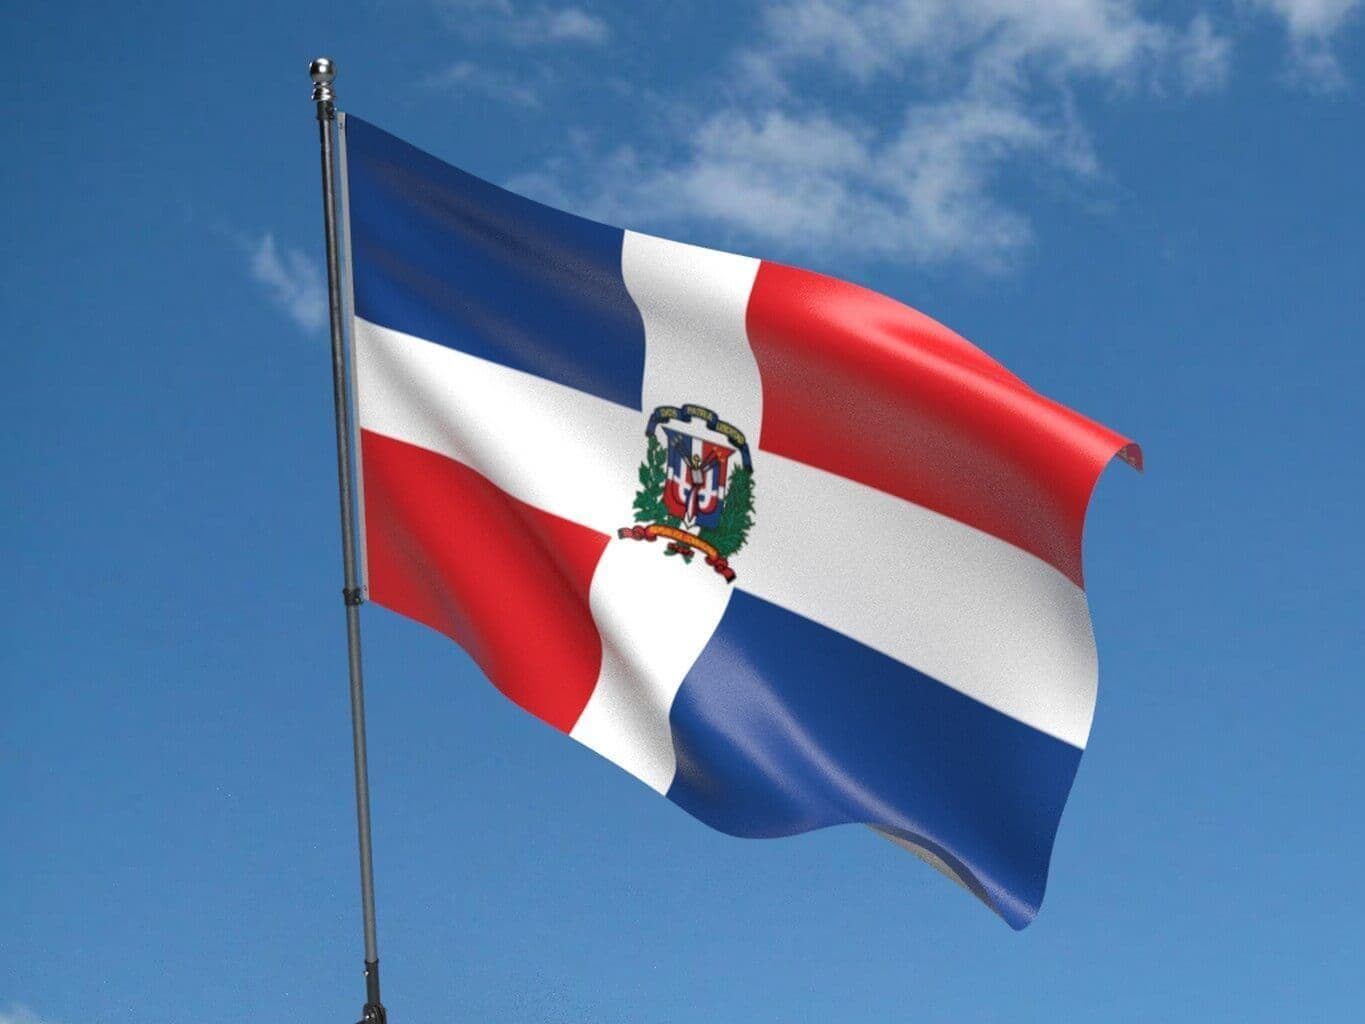 The Dominican Republic World Flag: A Symbol of National Pride